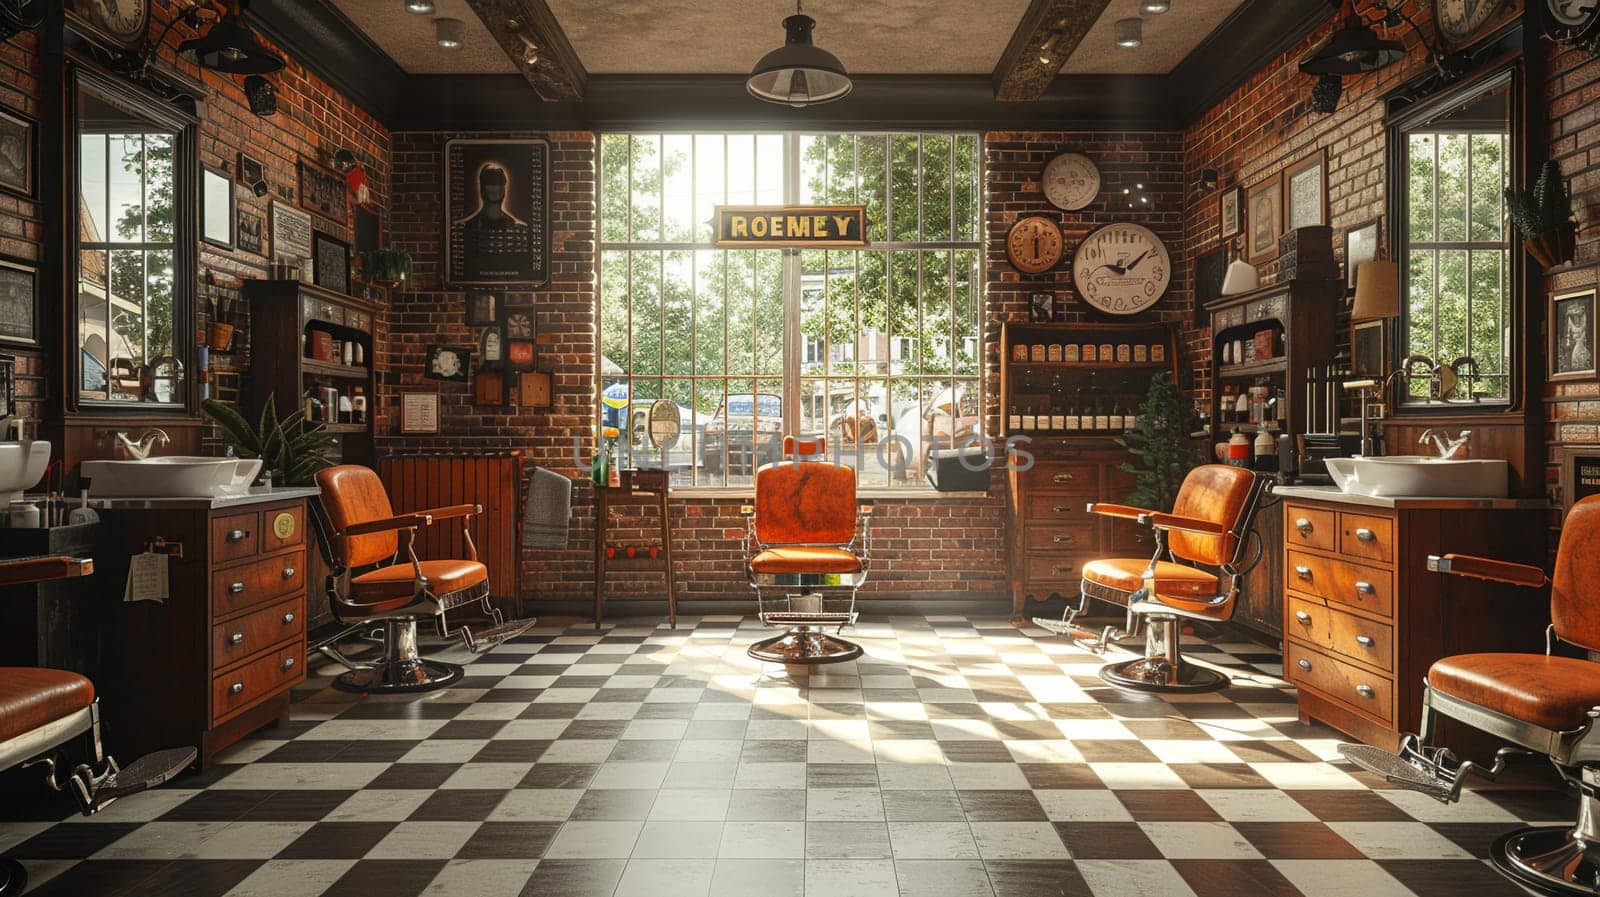 Vintage barbershop interior with classic chairs and nostalgic decor by Benzoix